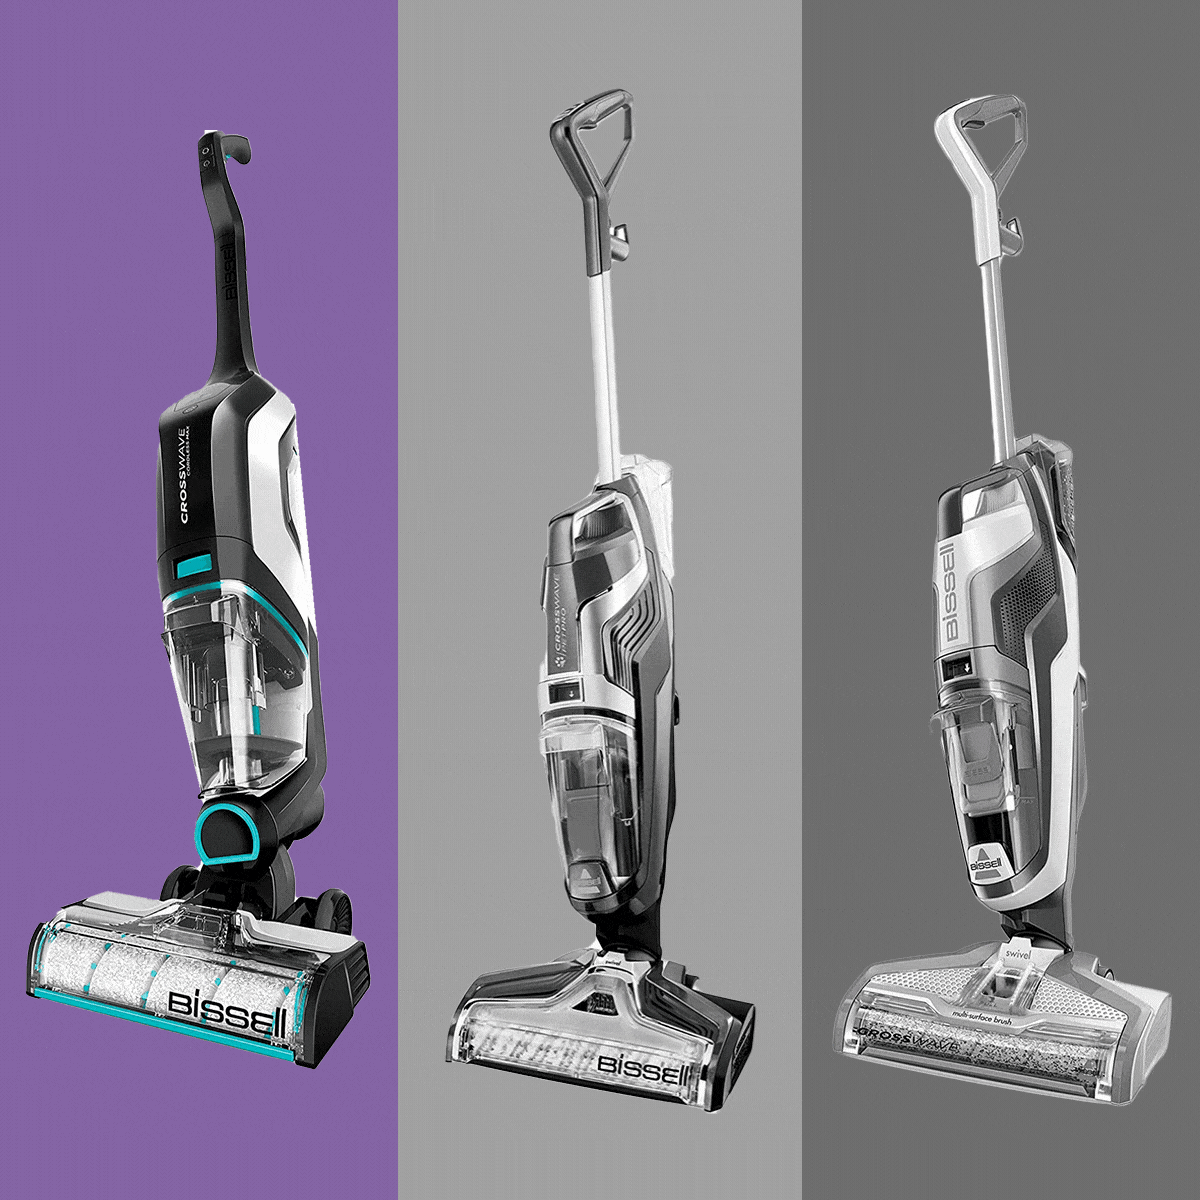 Can Vacuum Cleaner Be Used for Mopping?